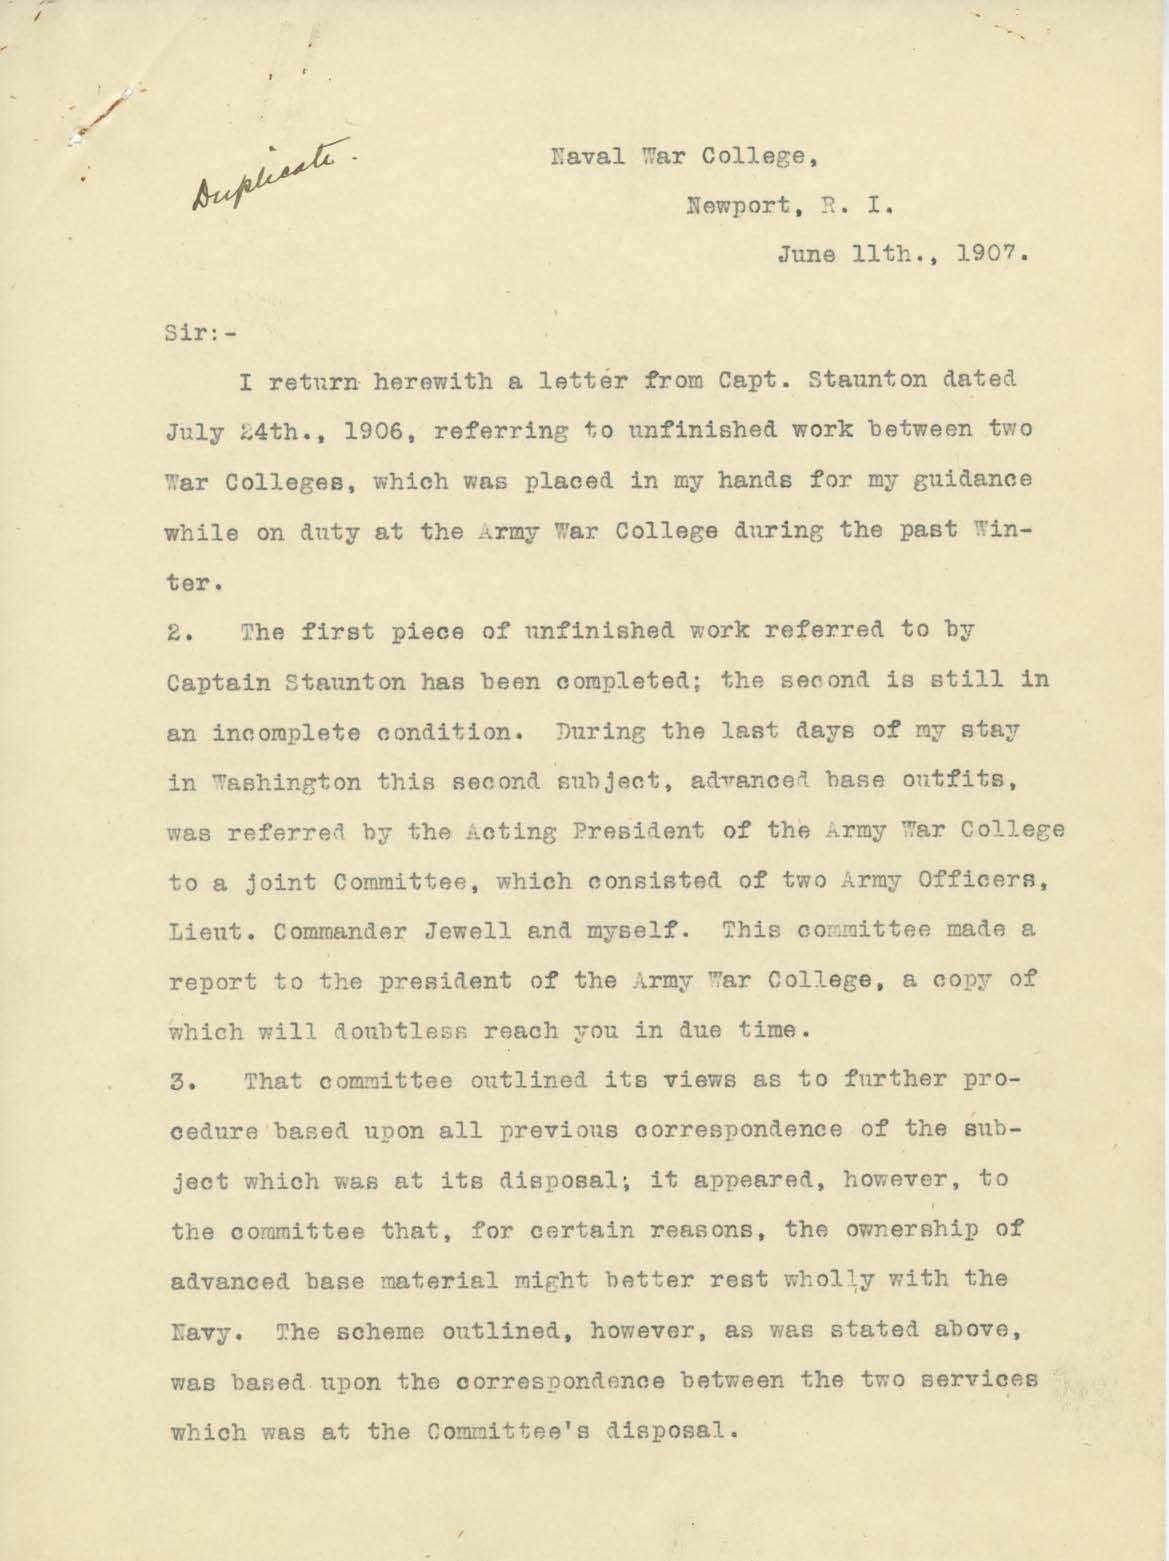 Letter from Harry S. Knapp to the President, Naval War College